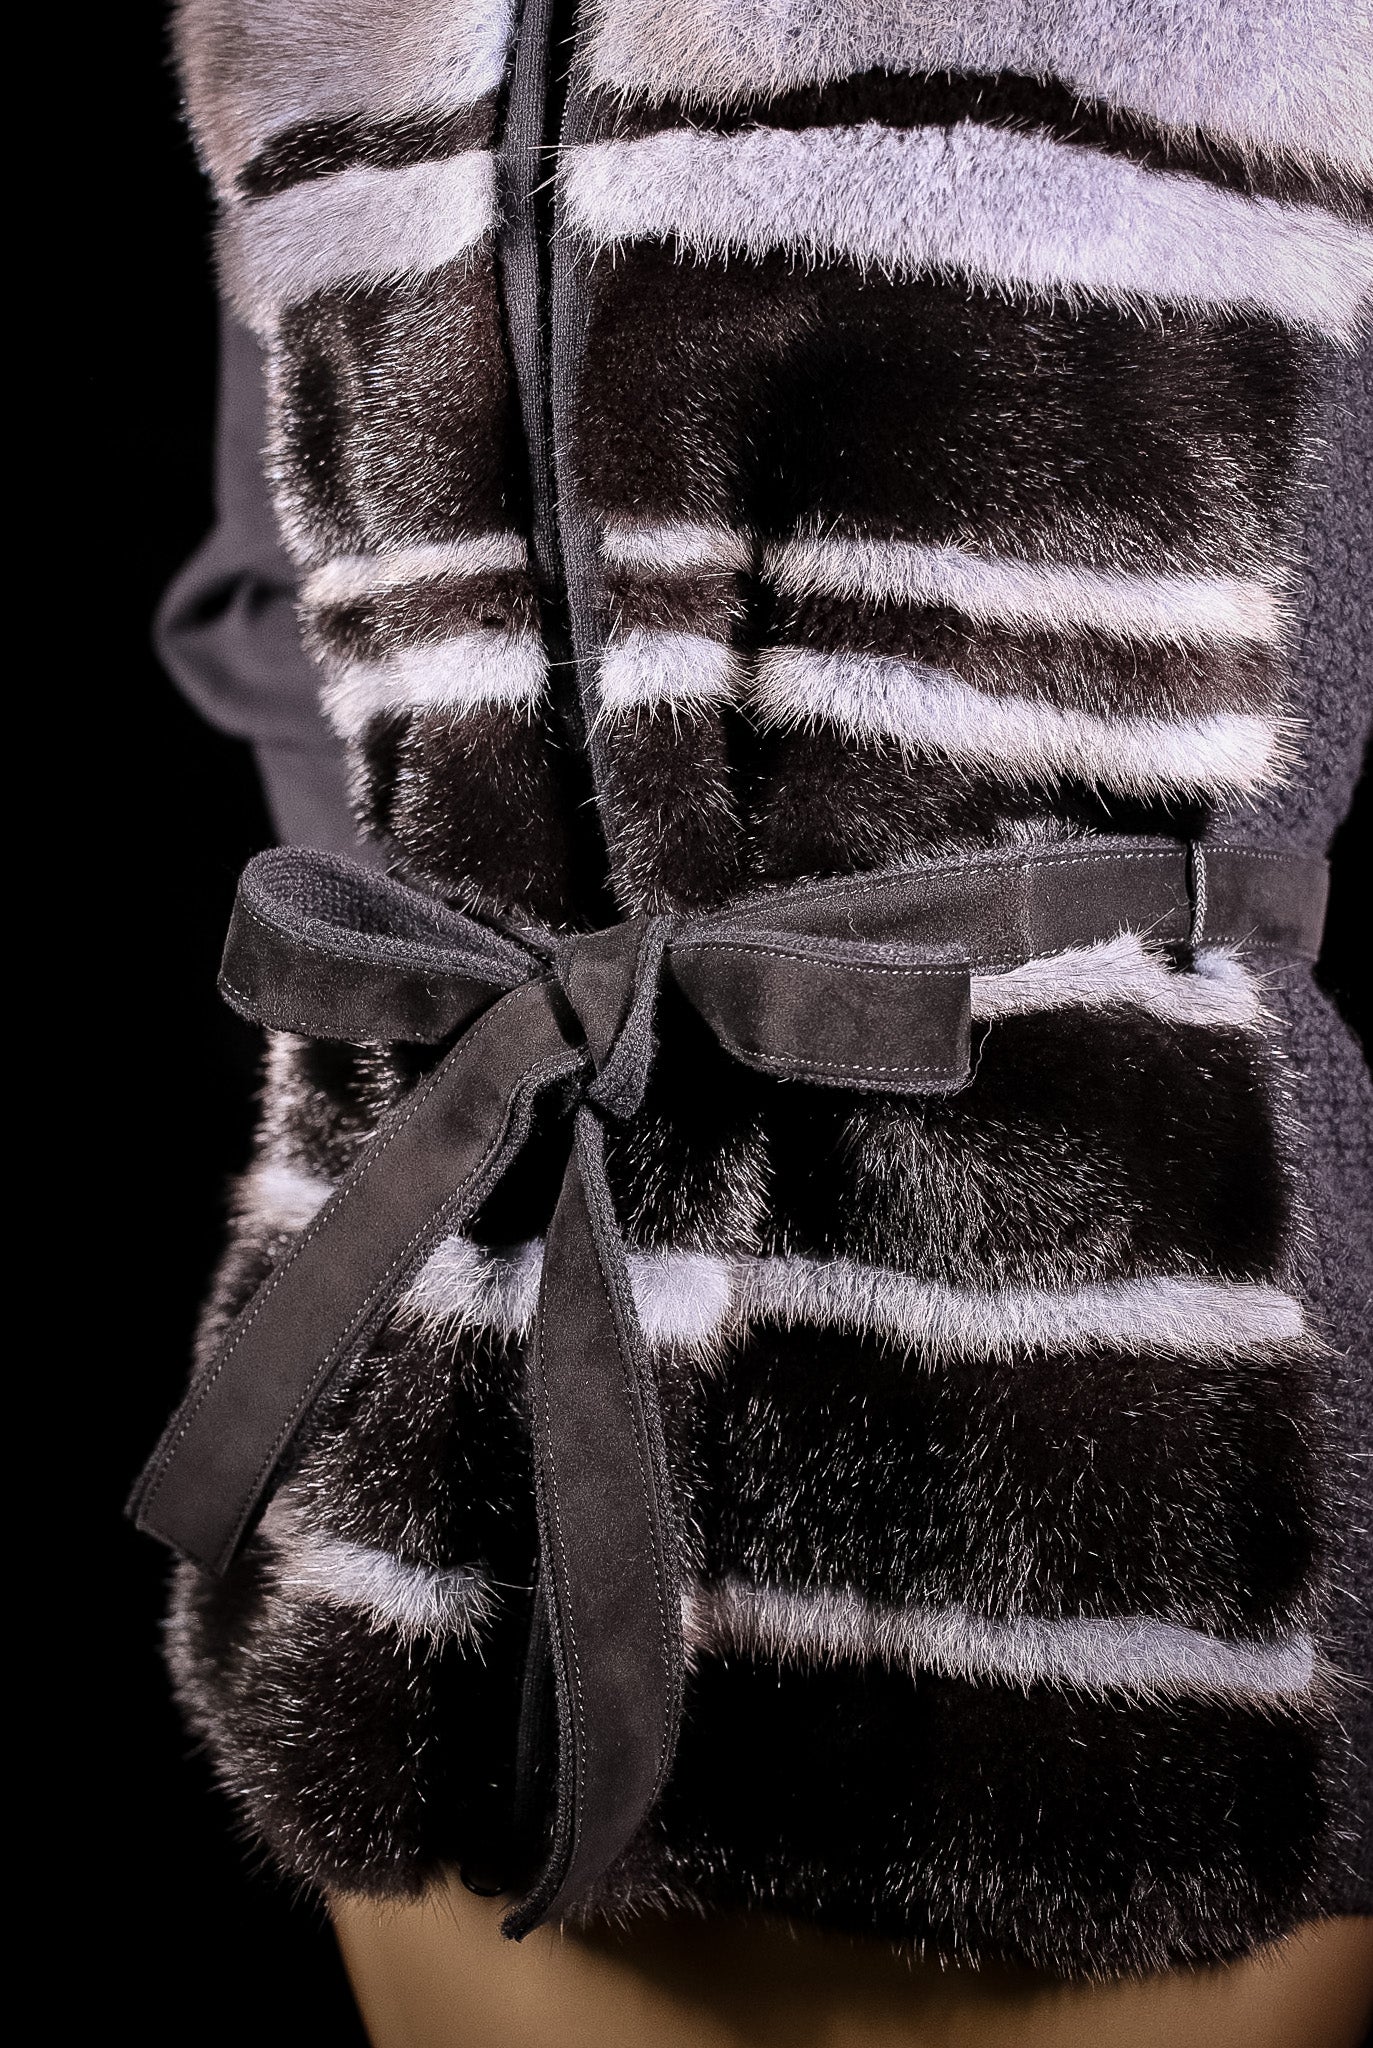 Woven Wool Belted Vest with Horizontal Mink Panels and Fox Trimmed Hood